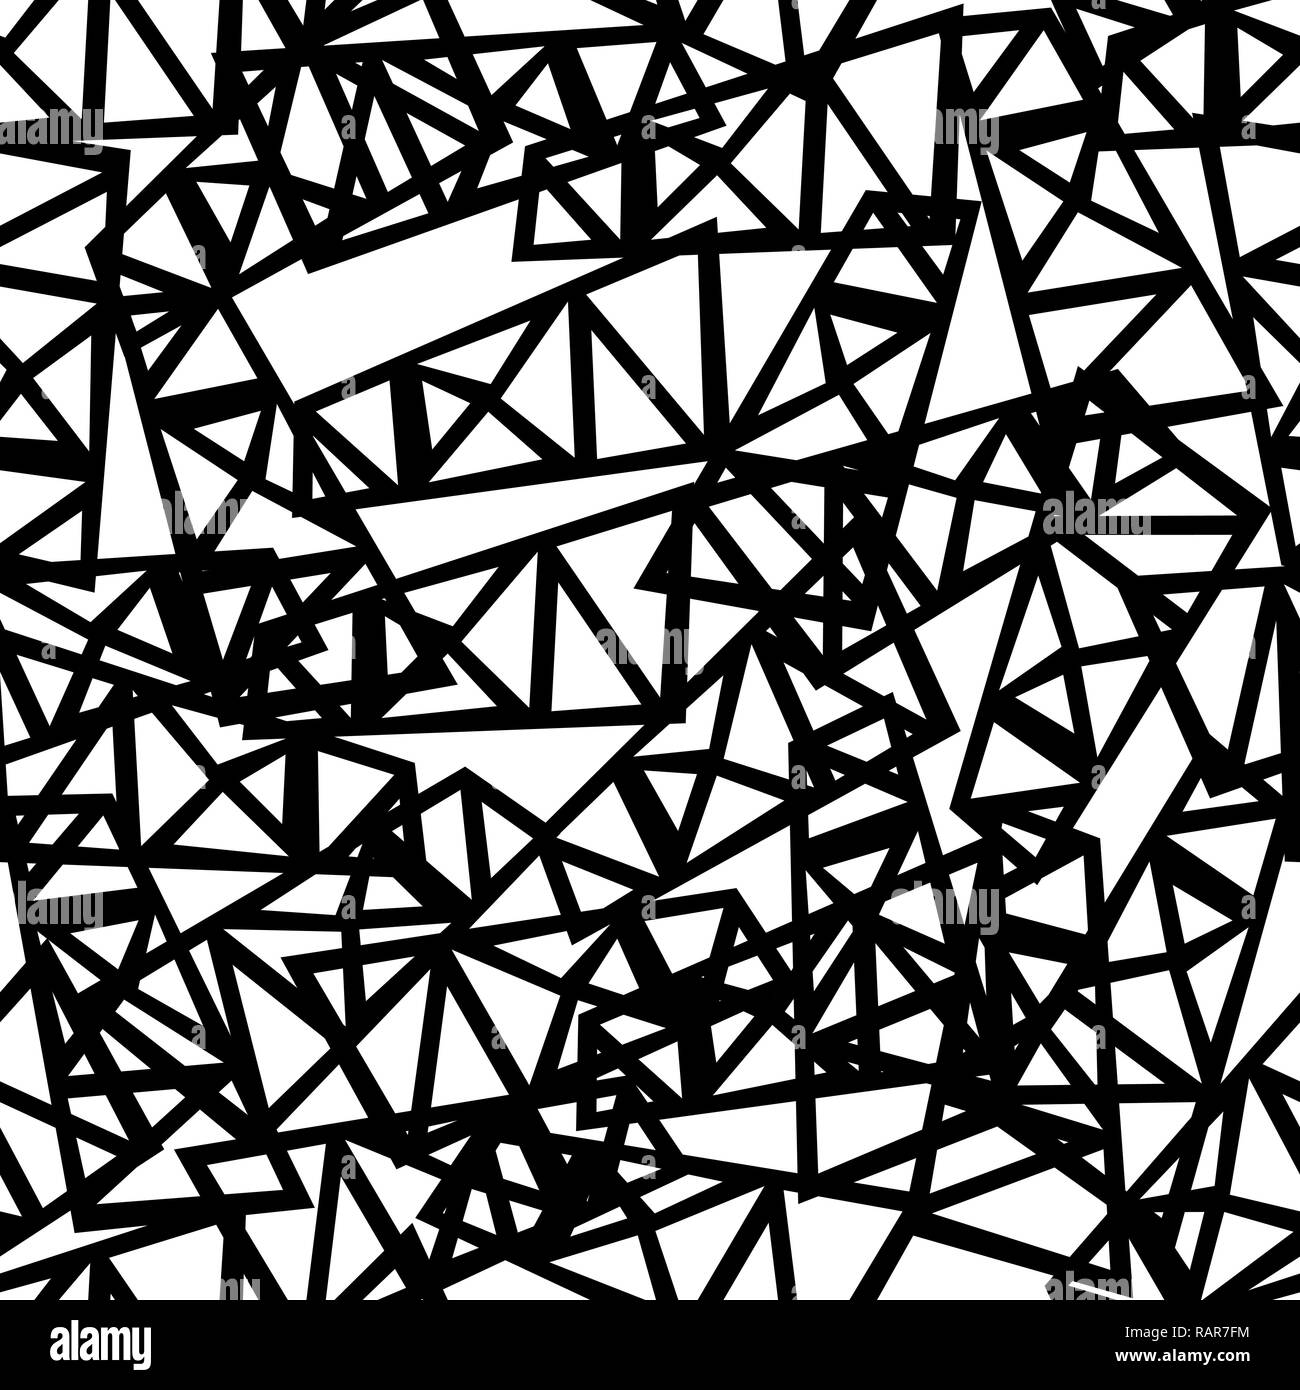 Abstract black and white seamless pattern. Sport style texture with chaotic  shapes, triangles